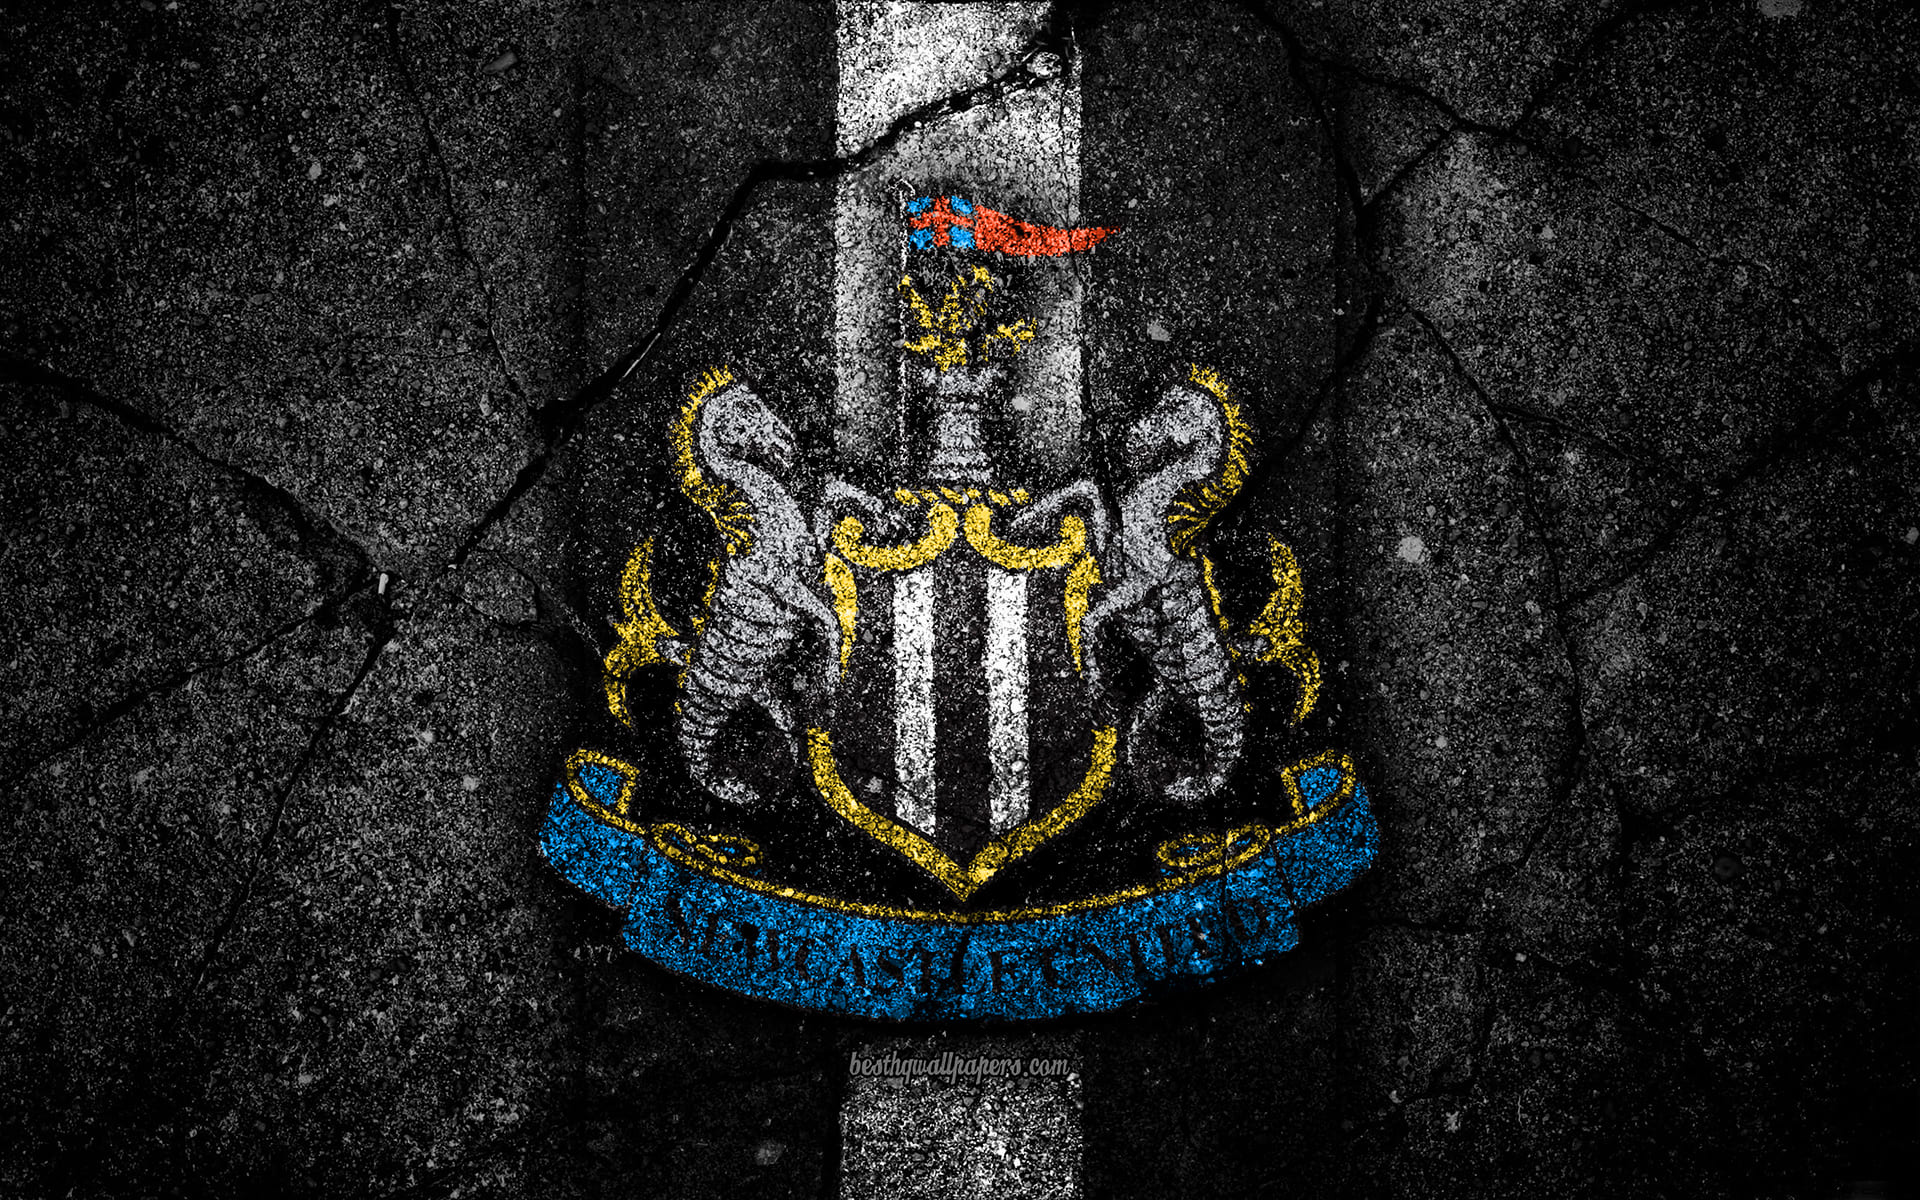 Newcastle United Wallpapers